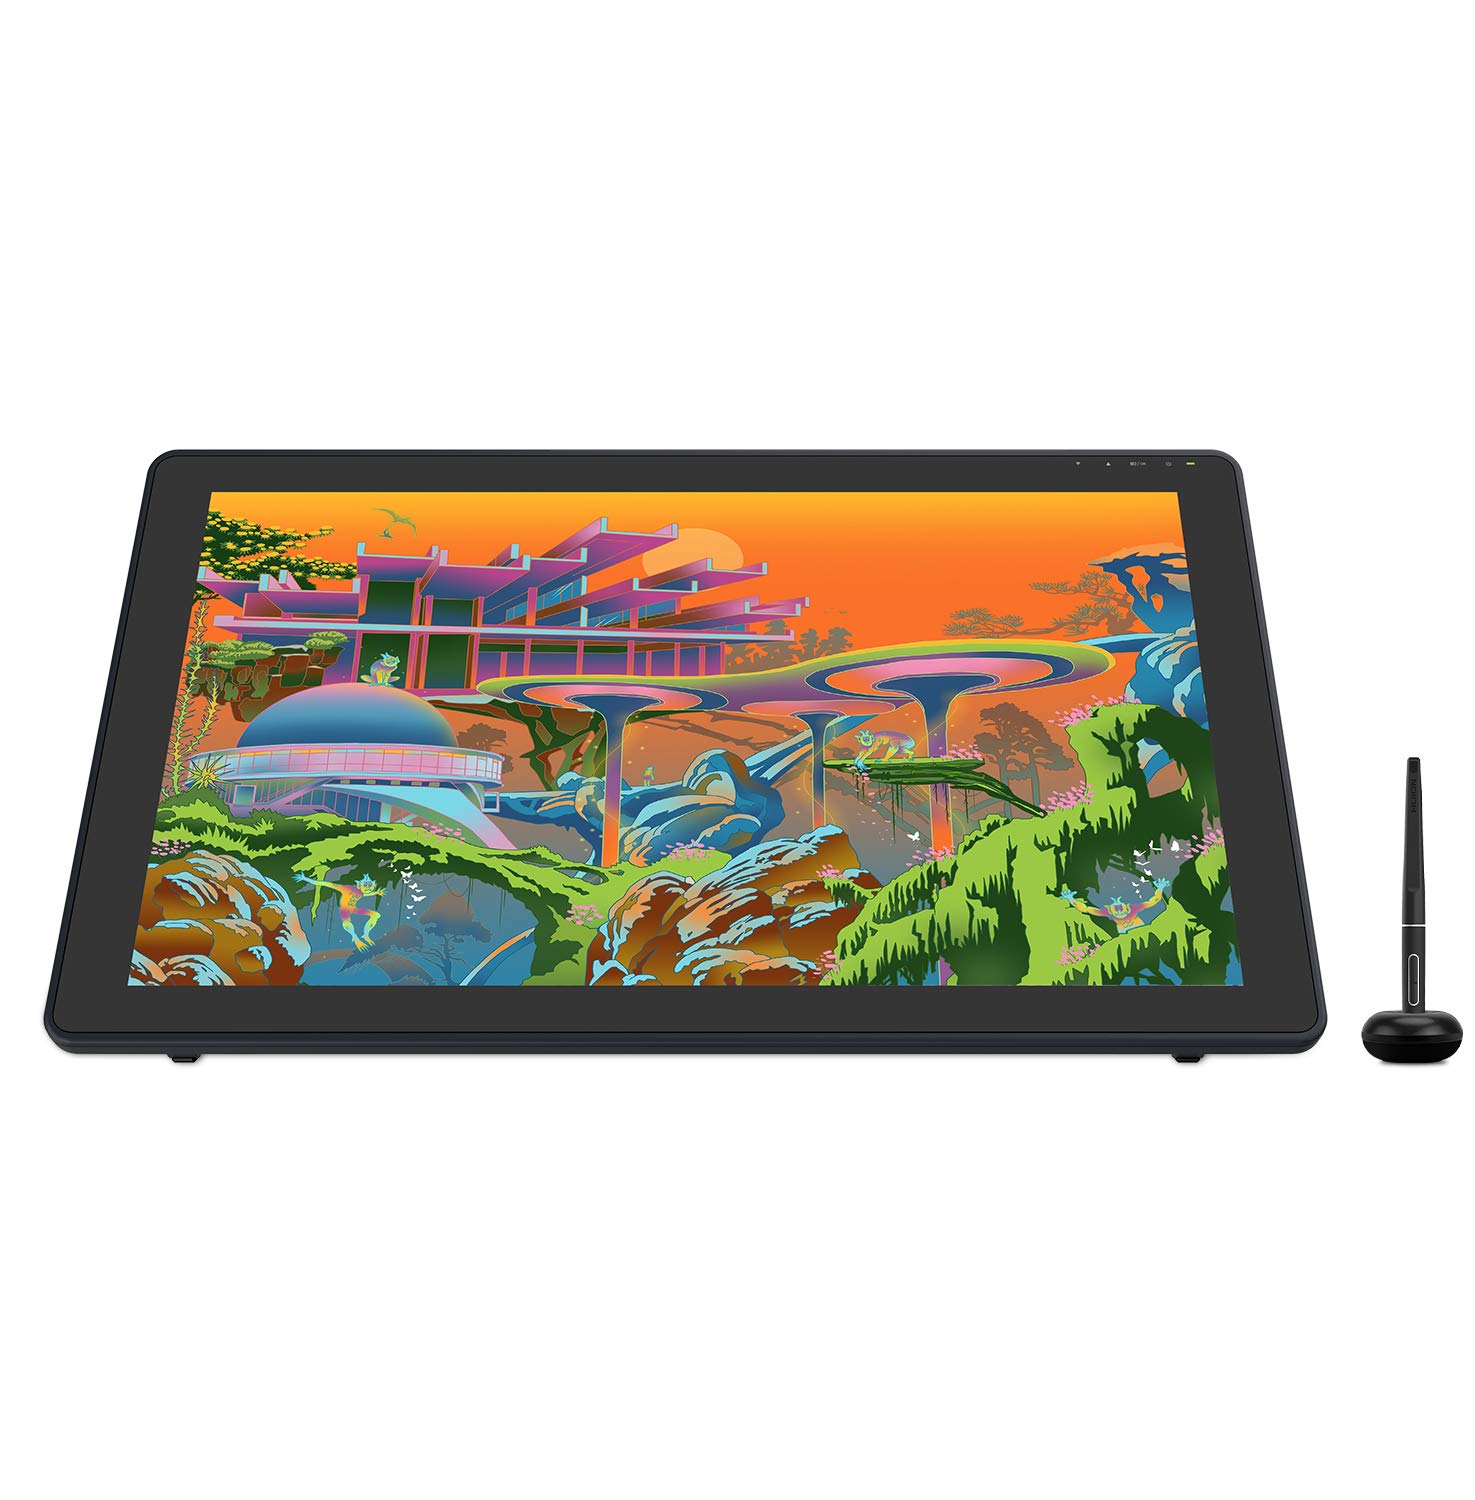 HUION Kamvas 22 Plus QLED Drawing Tablet with Full-Laminated Screen USB-C Connection 140% sRGB Tilt, 21.5 inch Graphics Art Tablet for Artist & Designer, Work with Mac, Windows, Linux & Android